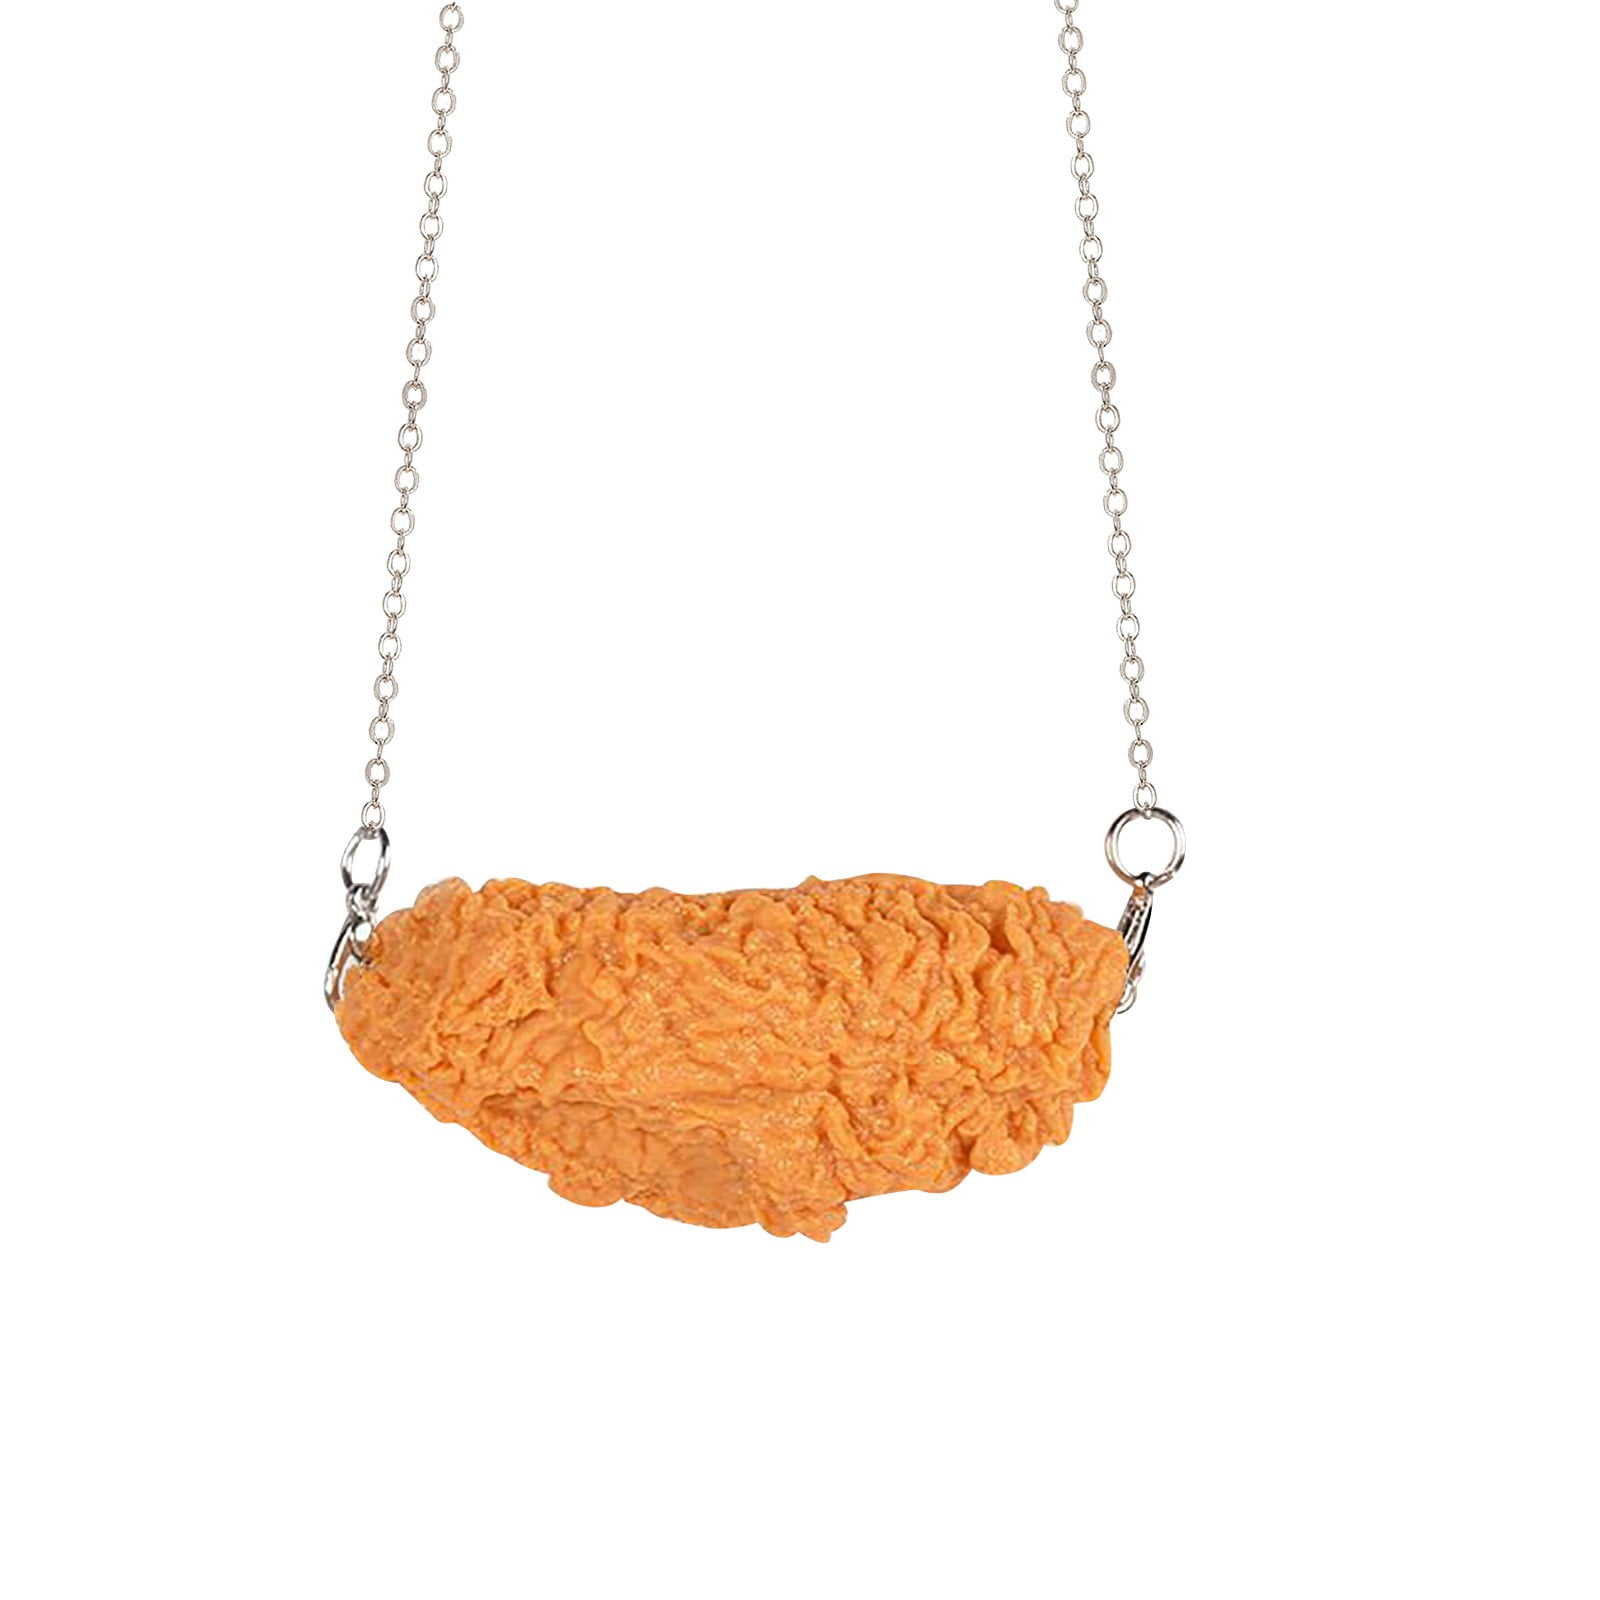 Buy Fake Chicken Nugget Necklace Online in India - Etsy